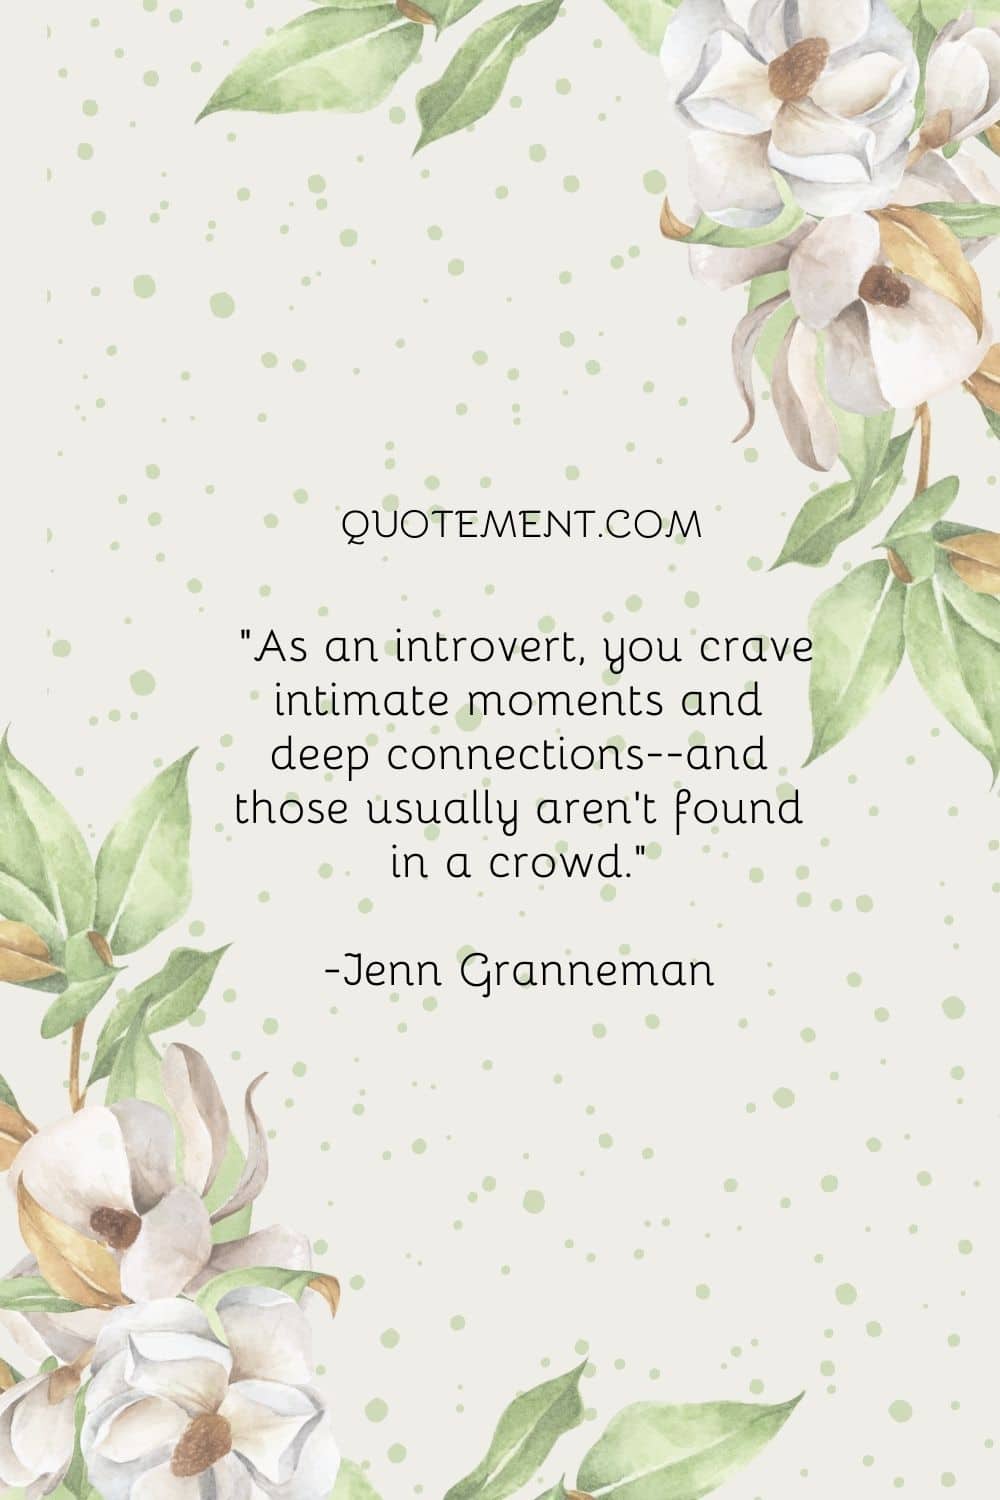 As an introvert, you crave intimate moments and deep connections